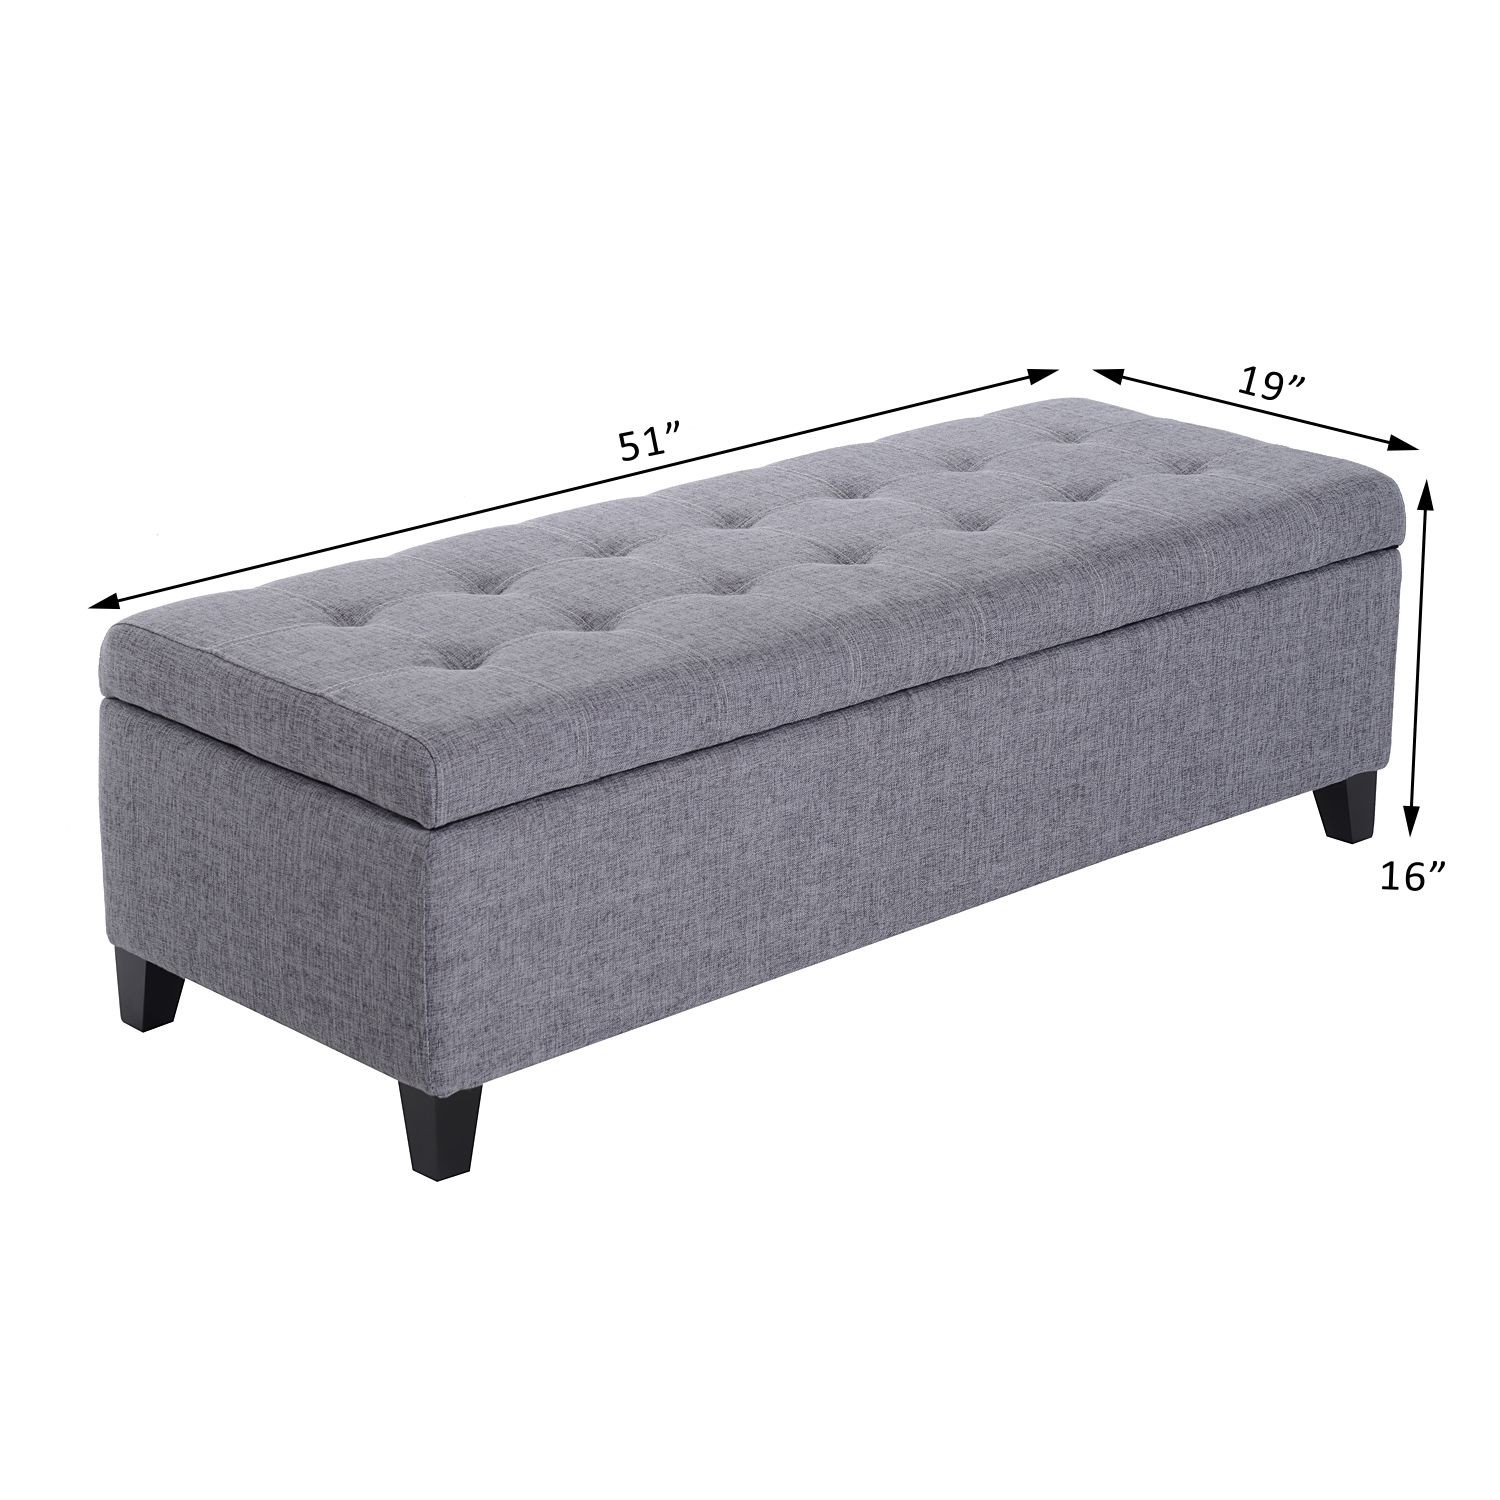 Fabric Bench With Storage
 51" Lift Top Storage Ottoman Tufted Fabric Shoe Bench